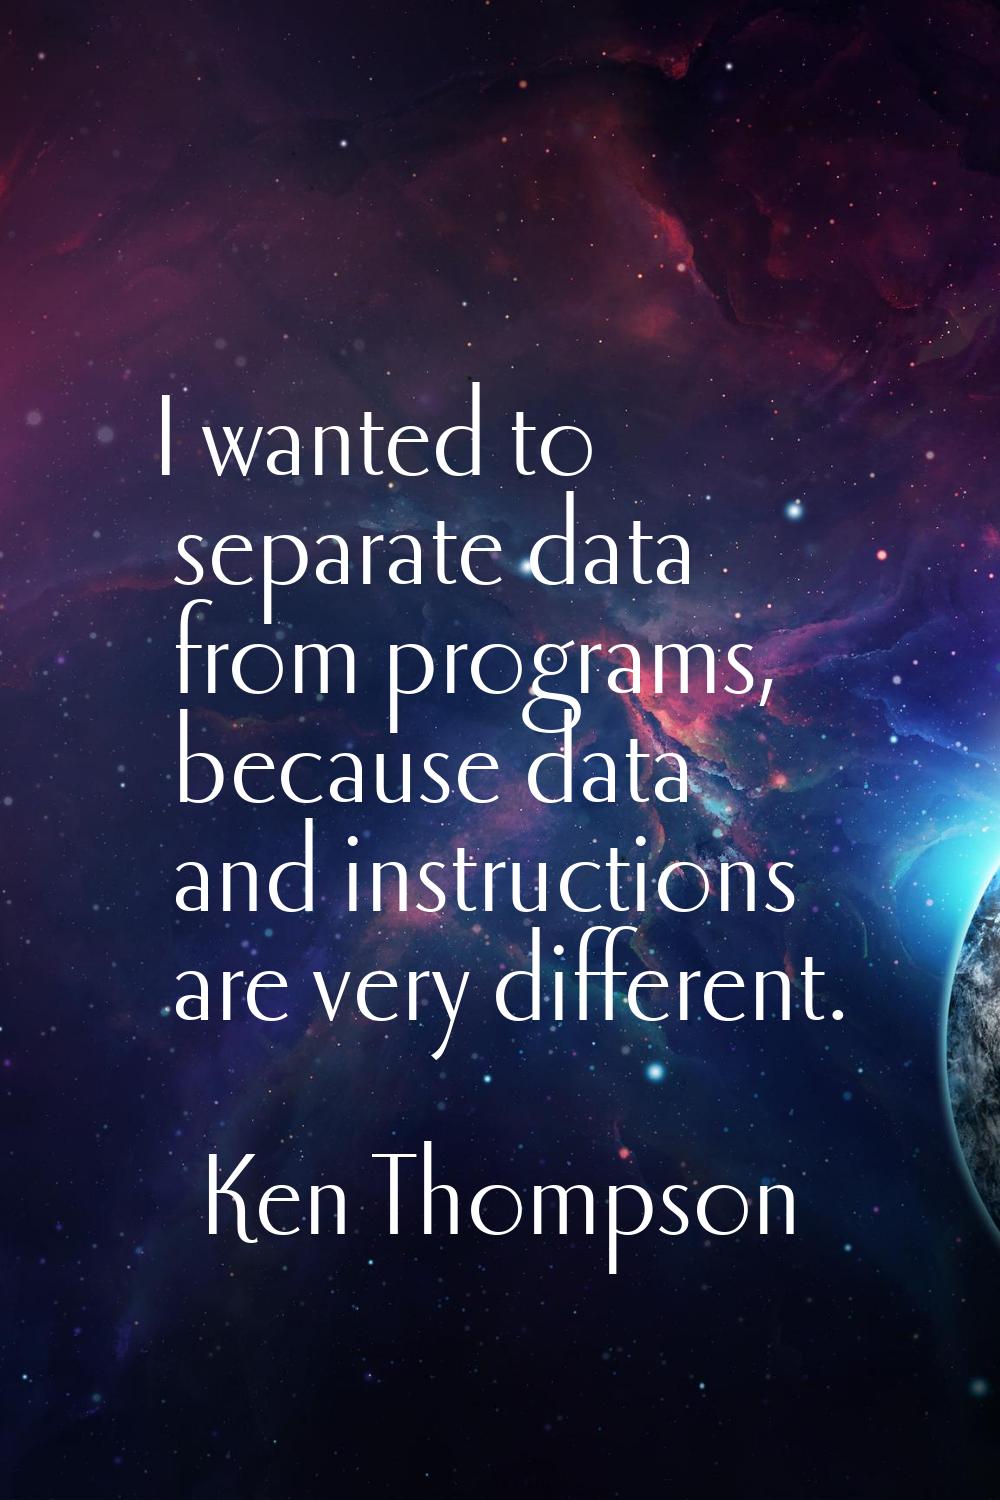 I wanted to separate data from programs, because data and instructions are very different.